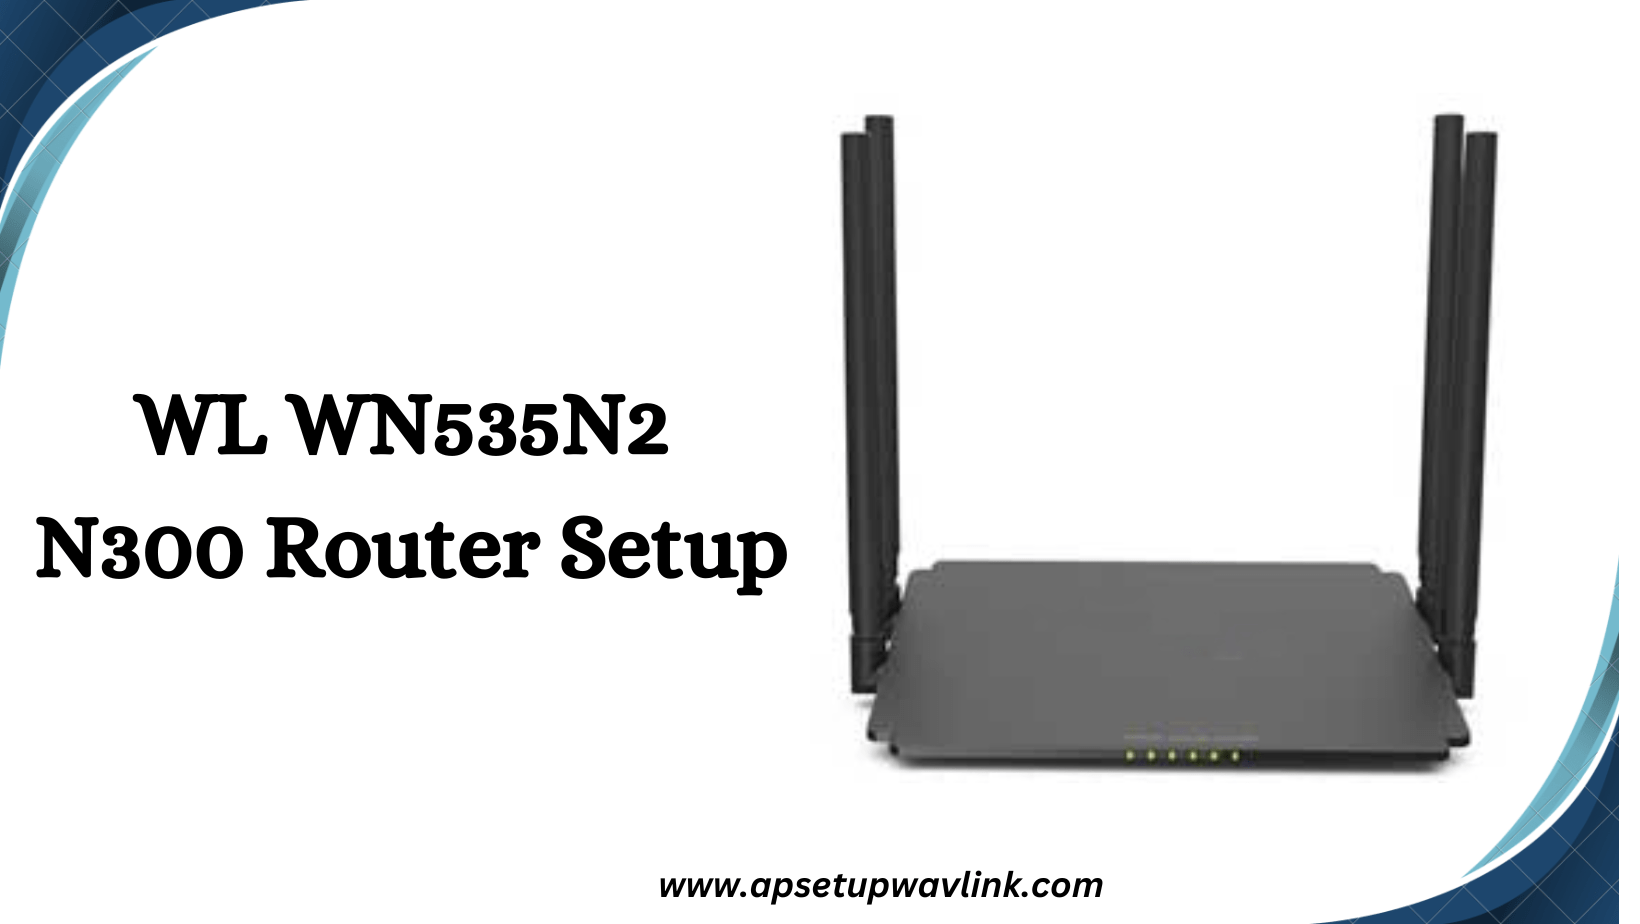 You are currently viewing WL WN535N2 N300 Router Setup